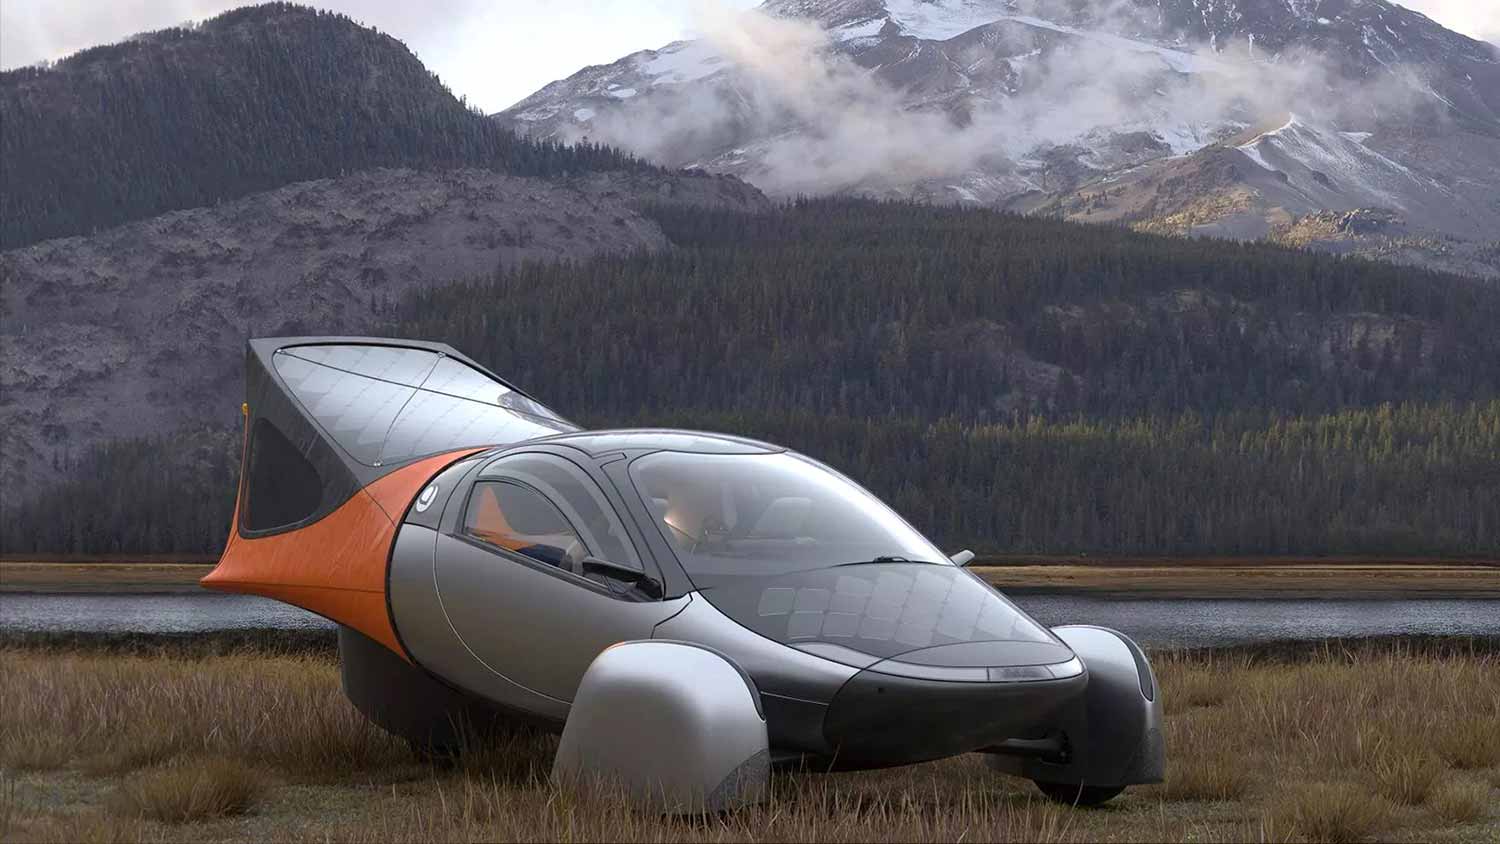 A three-wheeled black and silver car with a tent mounted in the rear sits in a field with a stream and mountains in the background.